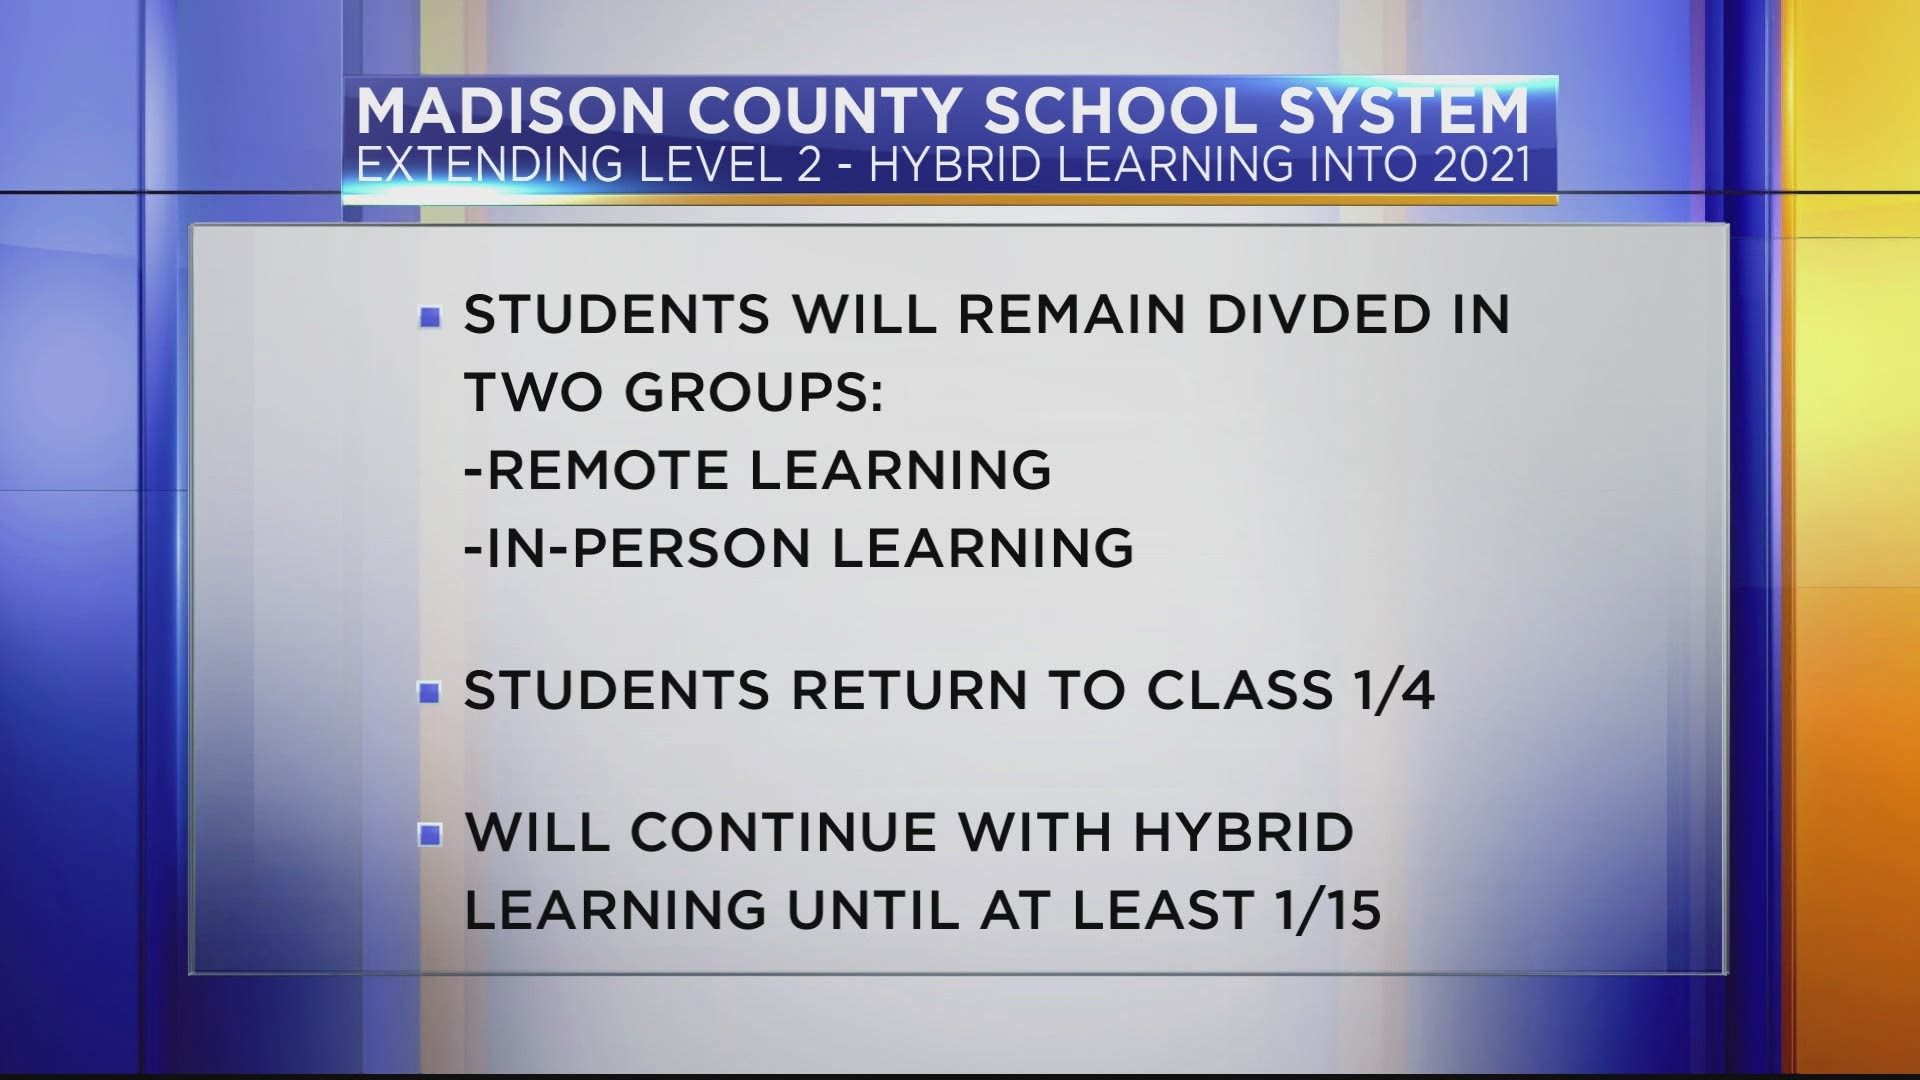 Students will return from break on January 4 and remain on a hybrid schedule until at least Friday, January 15.